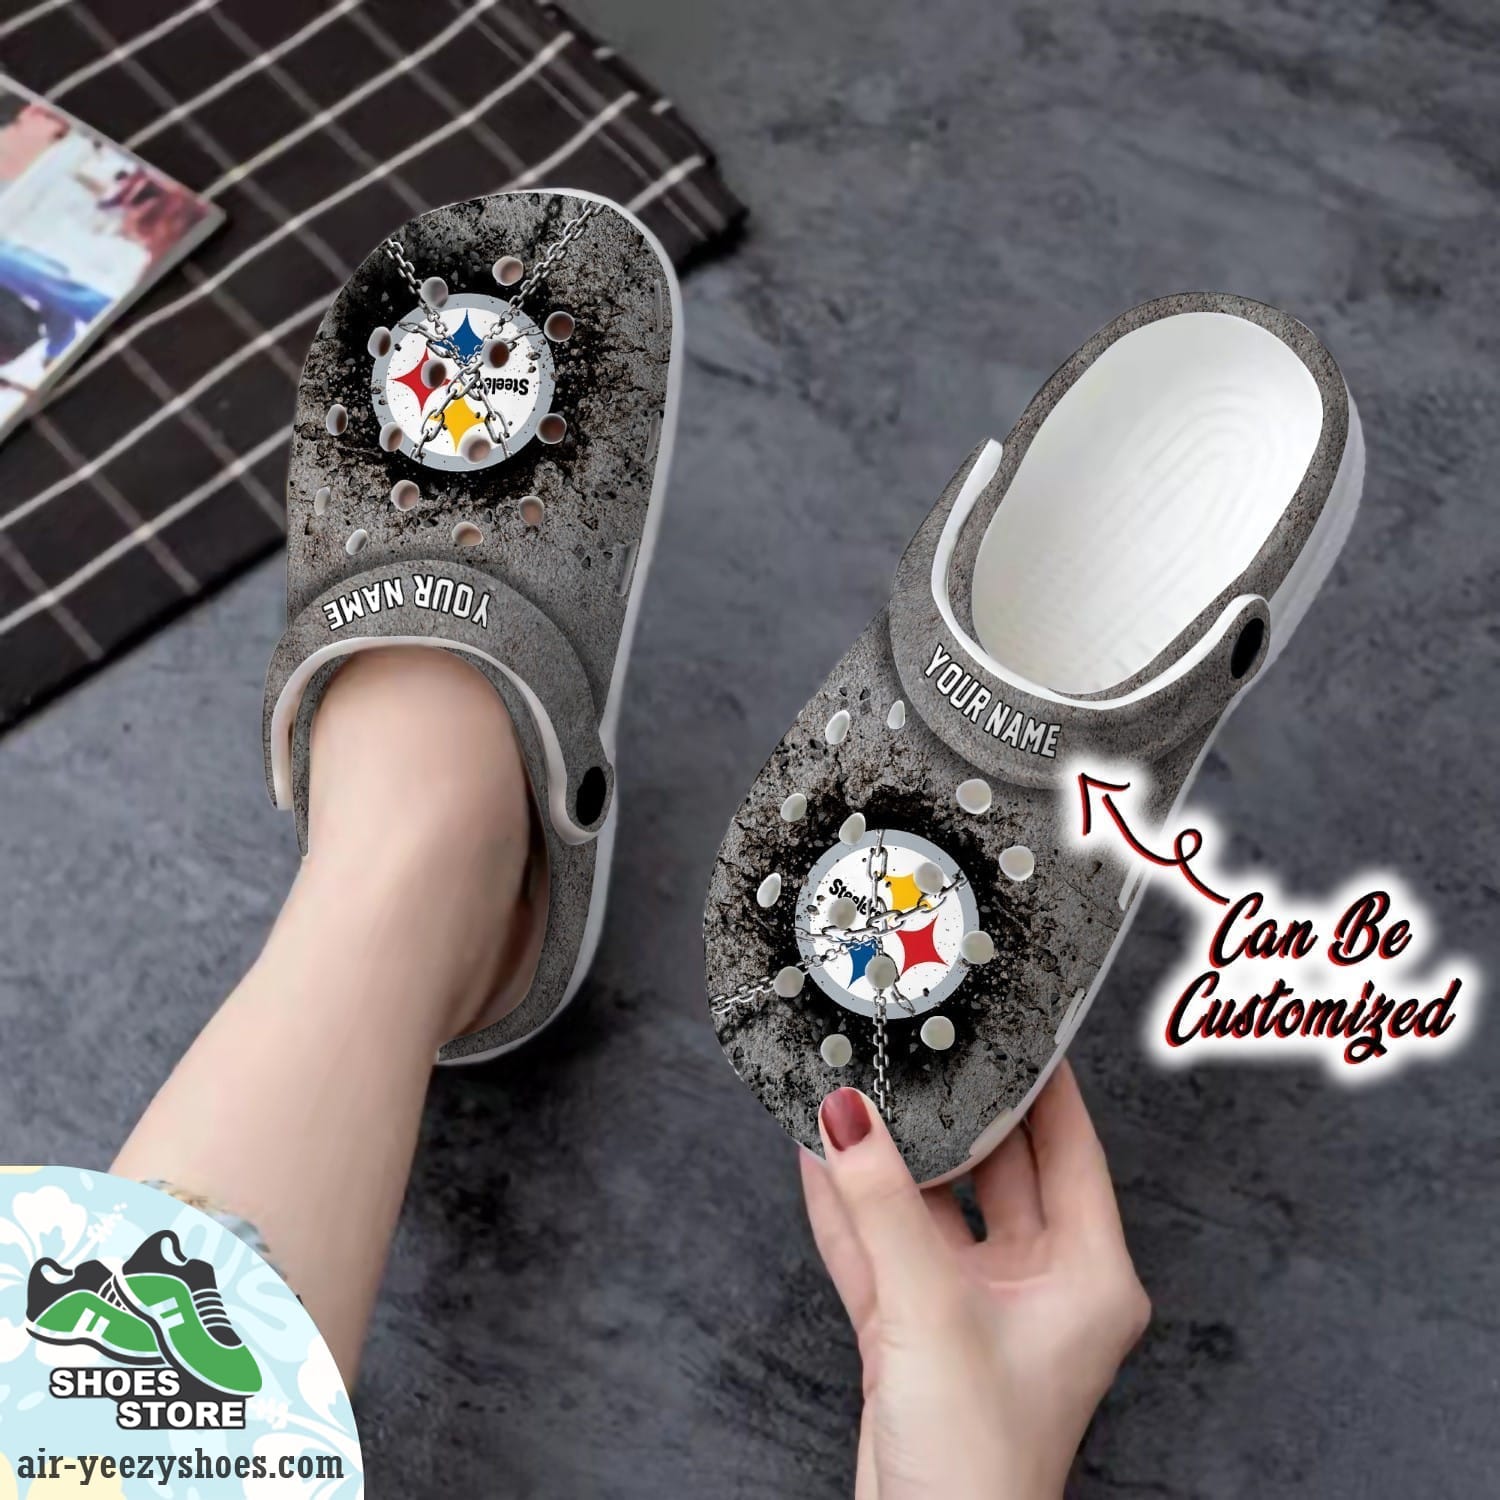 Pittsburgh Steelers Personalized Chain Breaking Wall Clog Shoes, Football Crocs